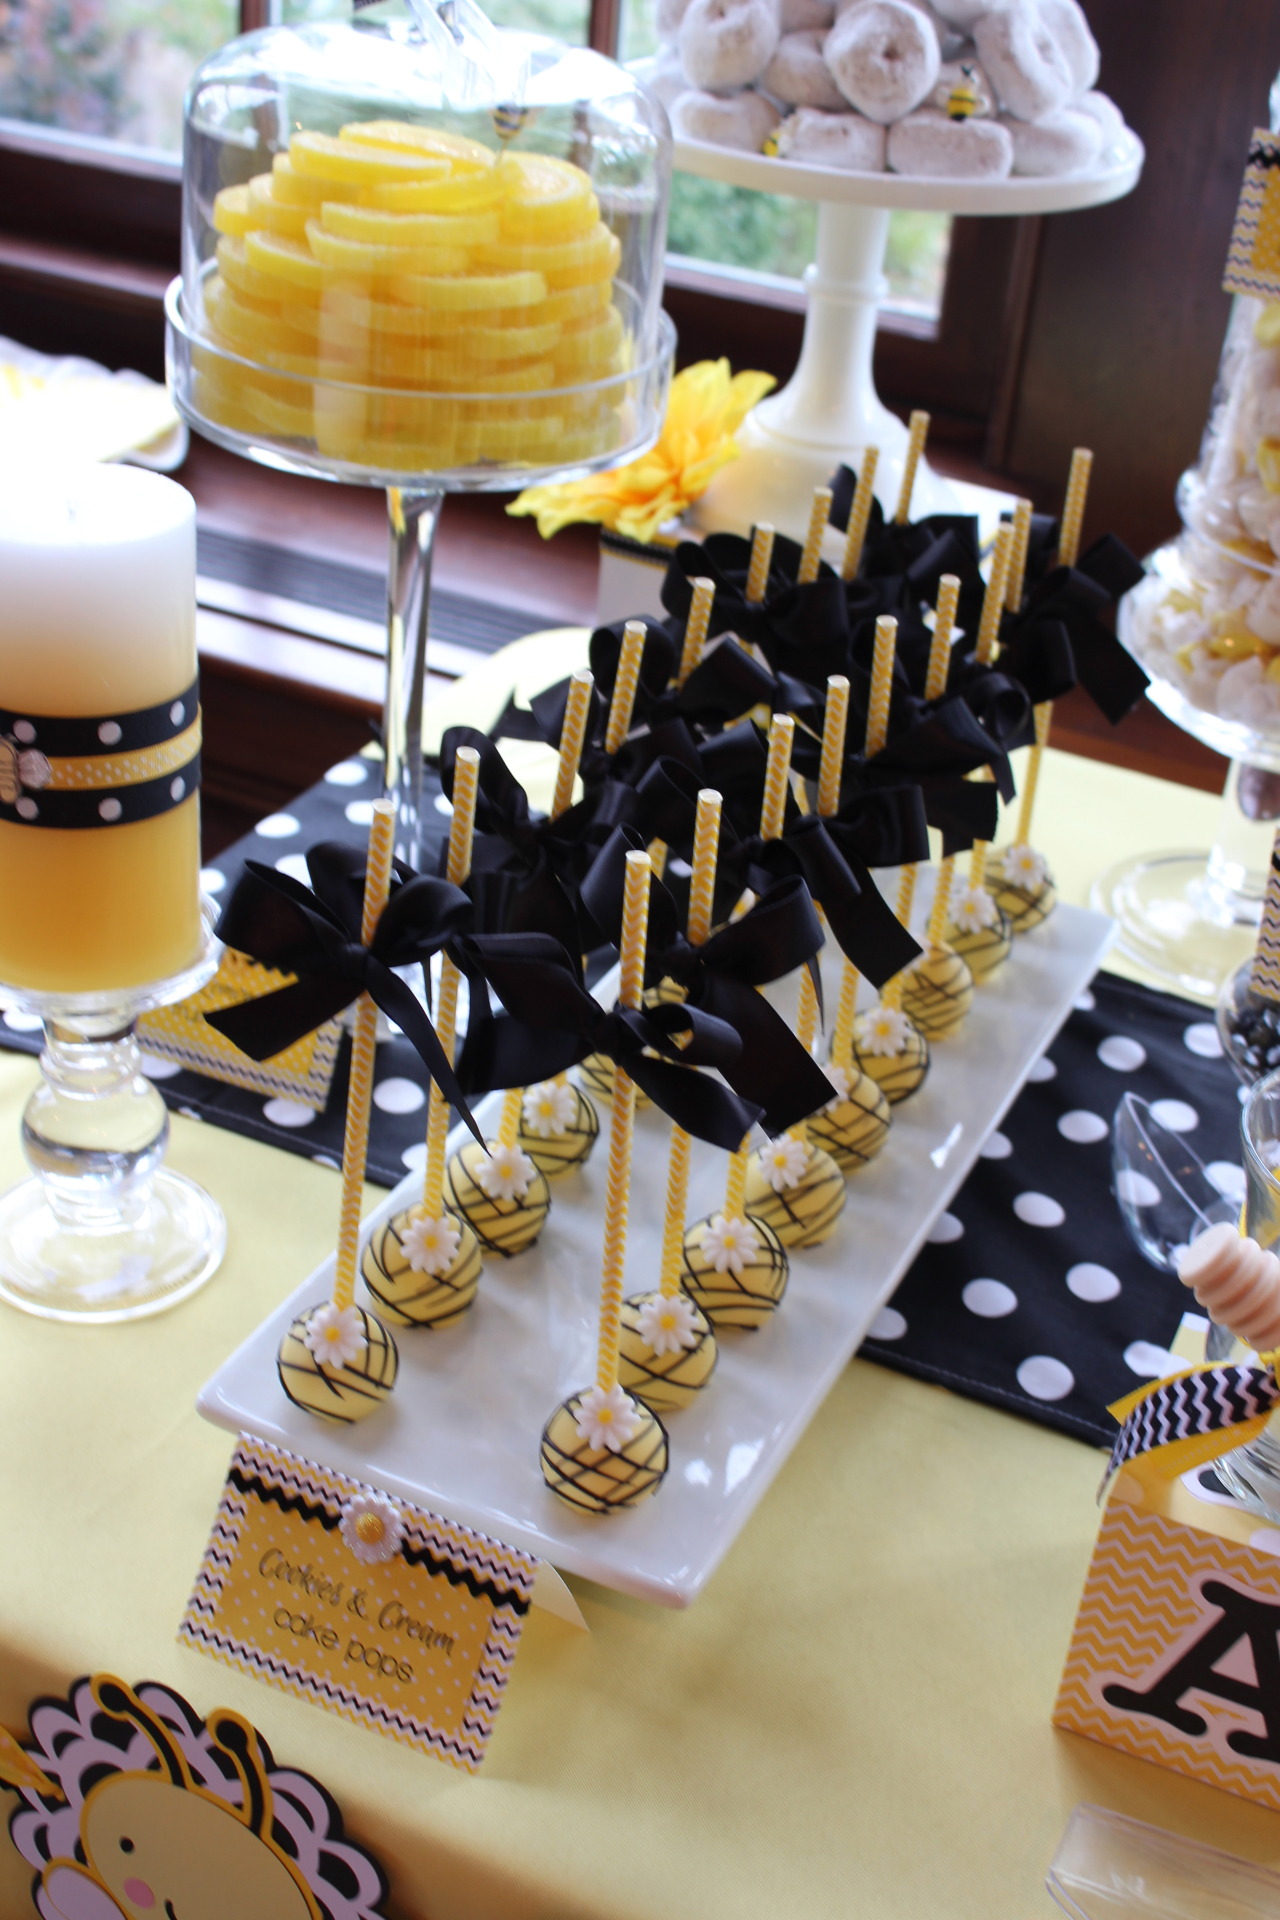 Sweet Simplicity Bakery — Bumblebee Themed Baby Shower (“Mommy To Bee”)...